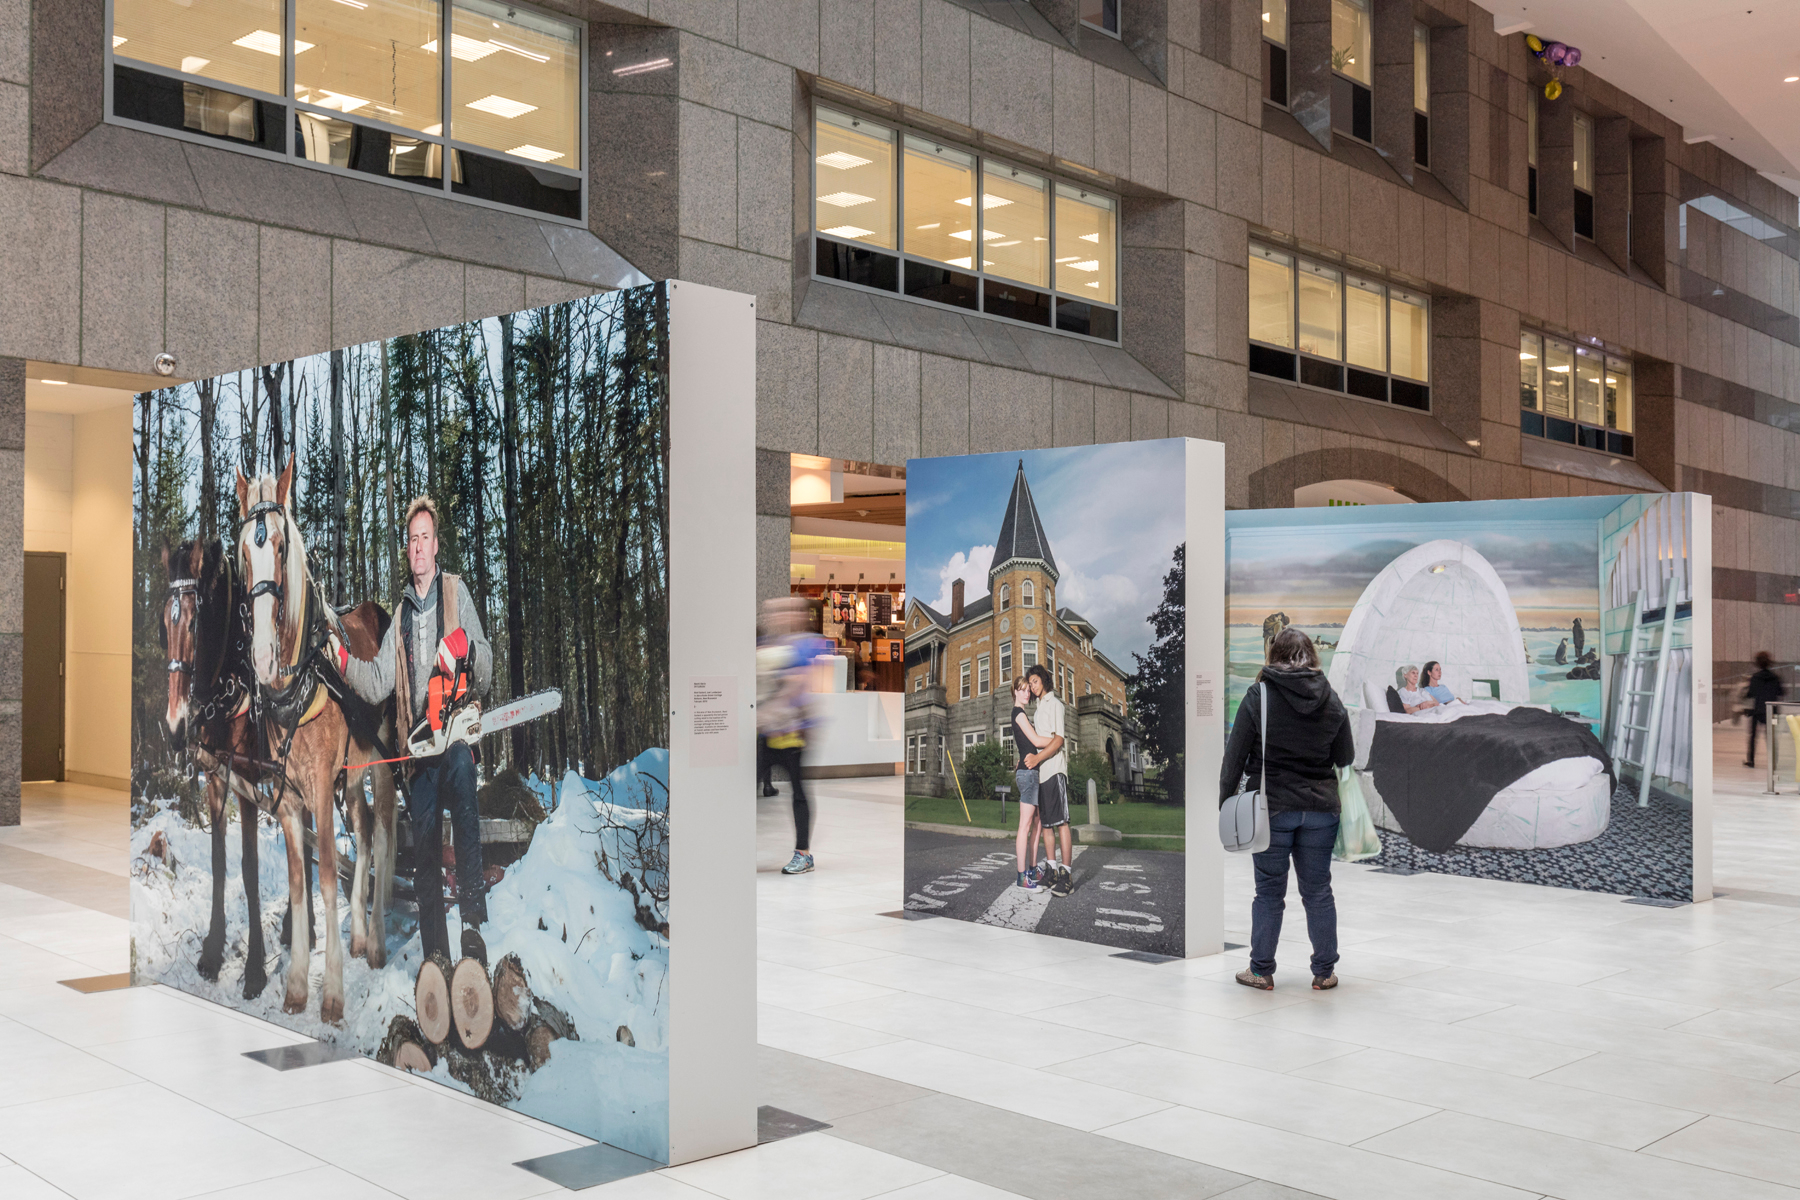     Naomi Harris, OH CANADA!, Installation view at North York Centre, 2017. Photo by Toni Hafkenscheid. 

